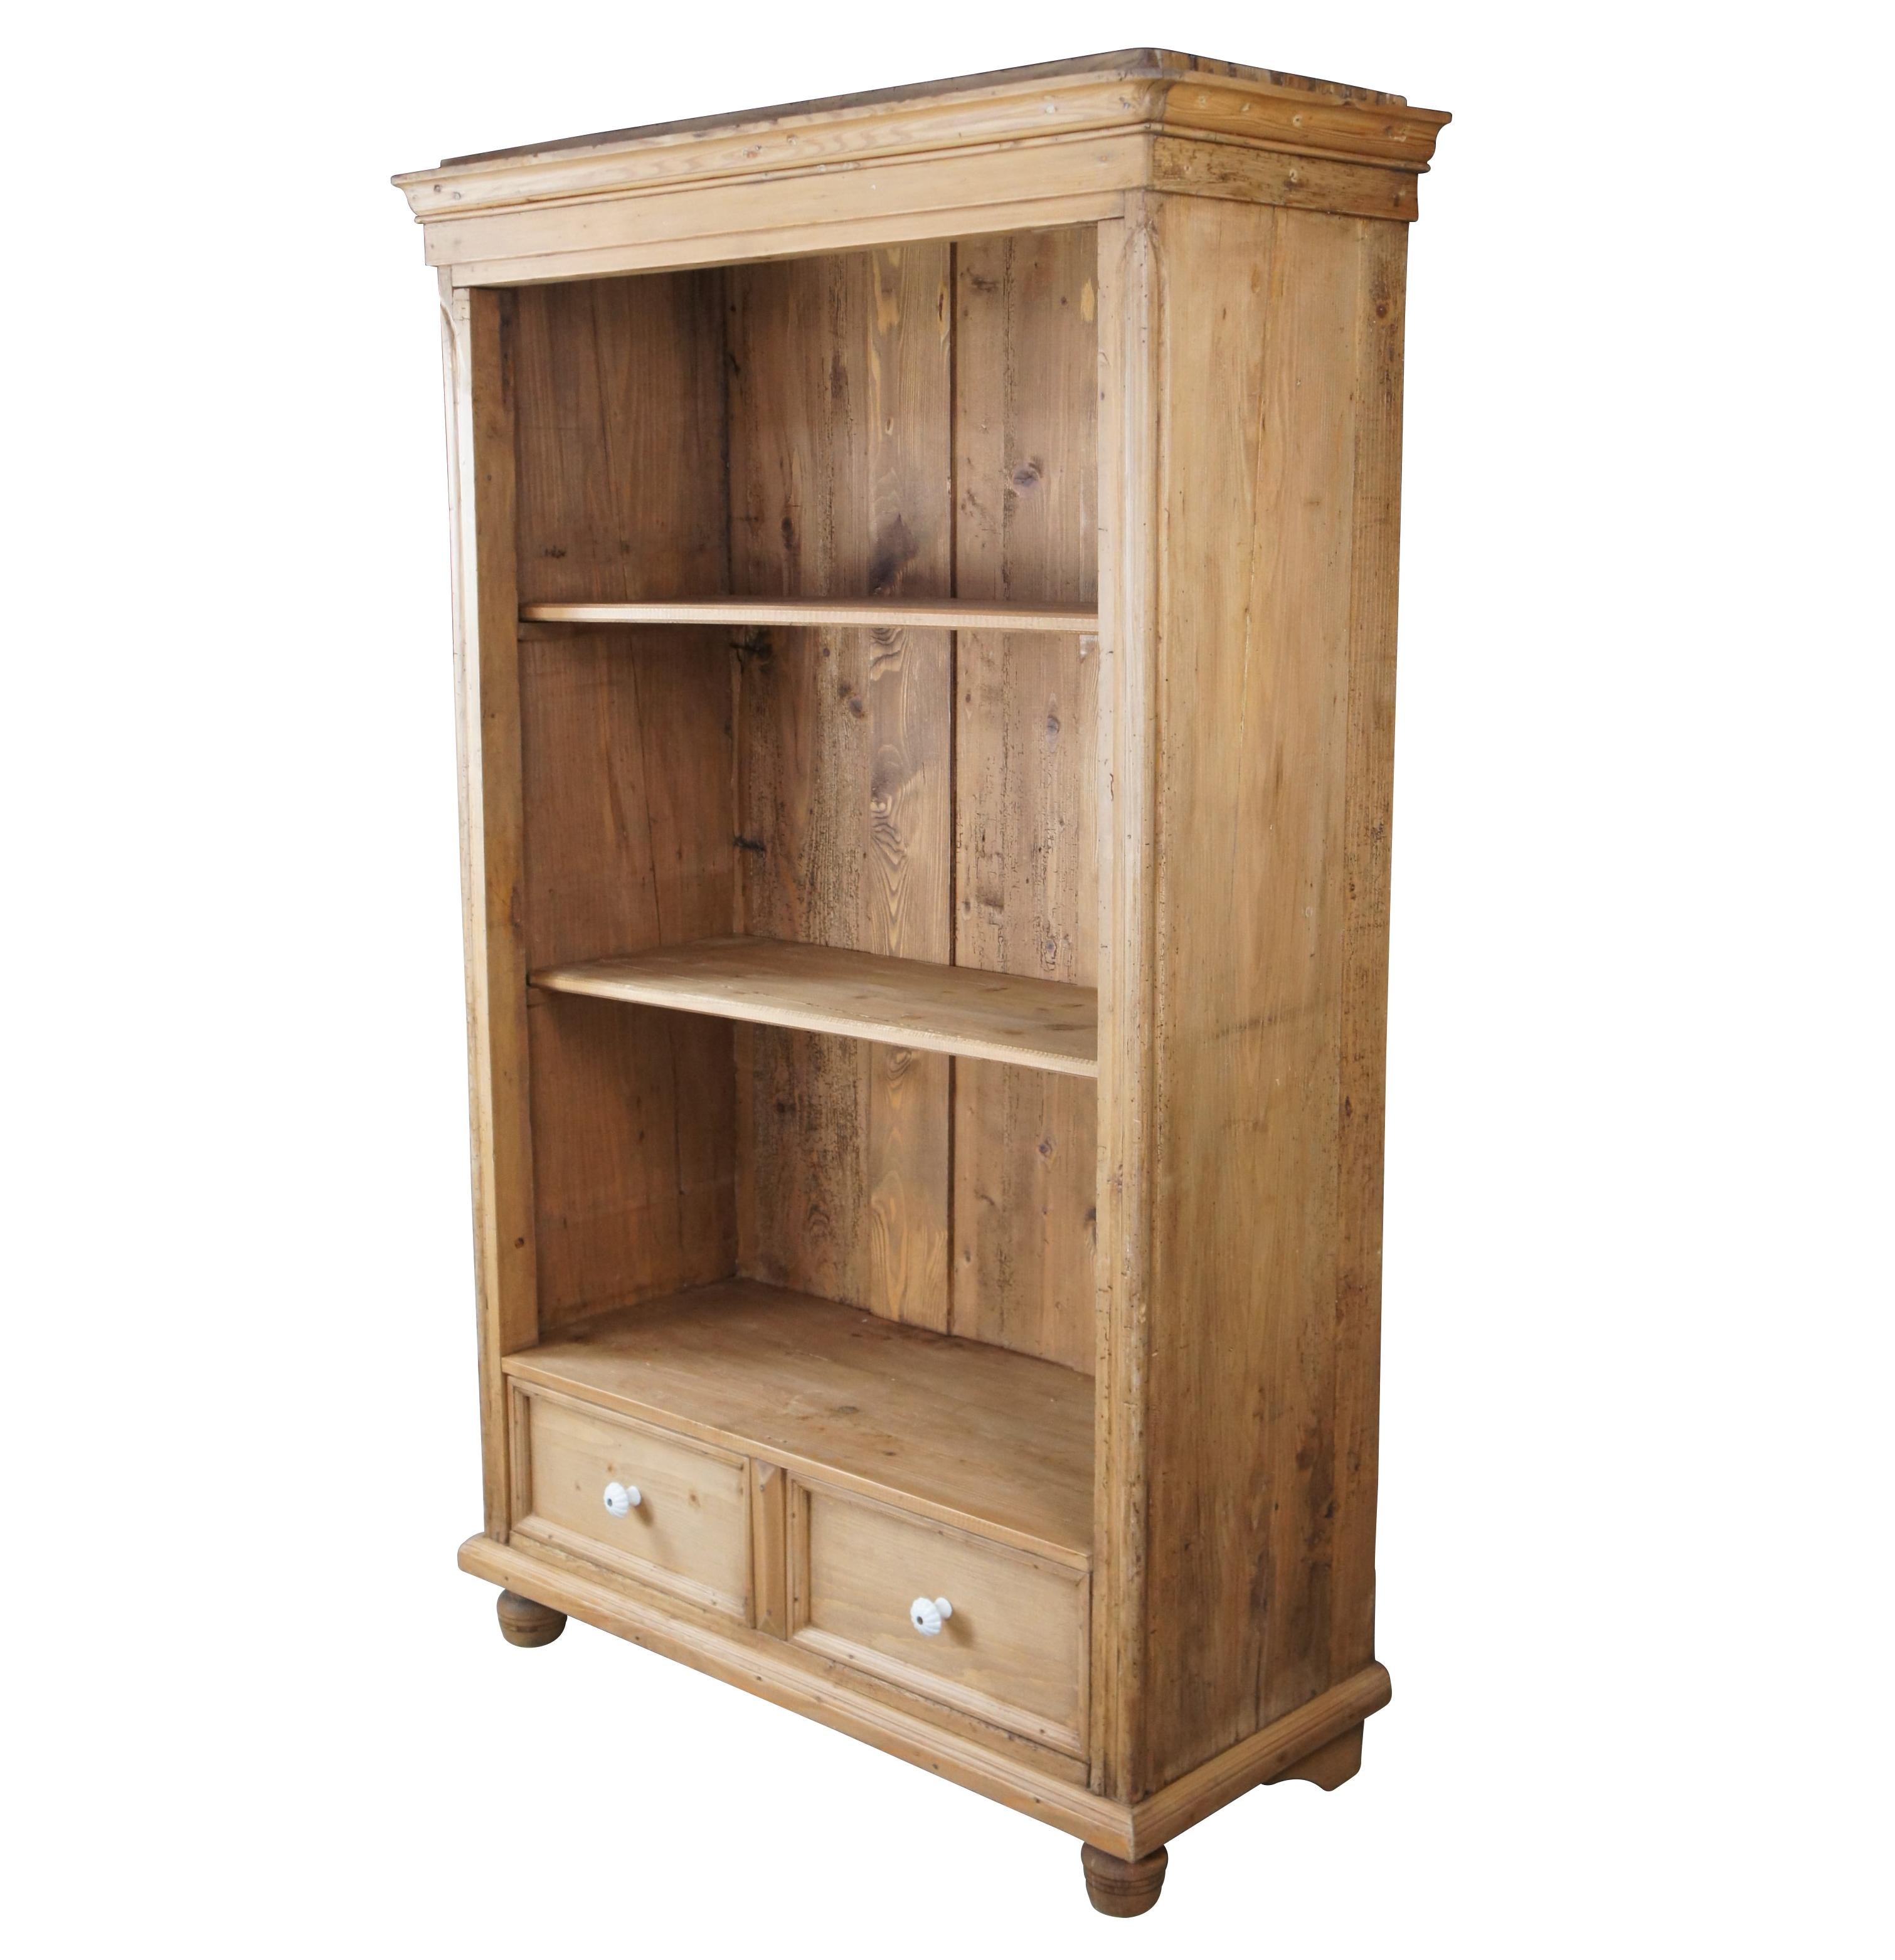 French Louis Philippe style bookcase, circa 1860s. Made from pine with a paneled back, removable shelves and lower dovetailed drawer with porcelain handles. Supported by turned peg feet. Great for display of books or collectibles. The cabinet was